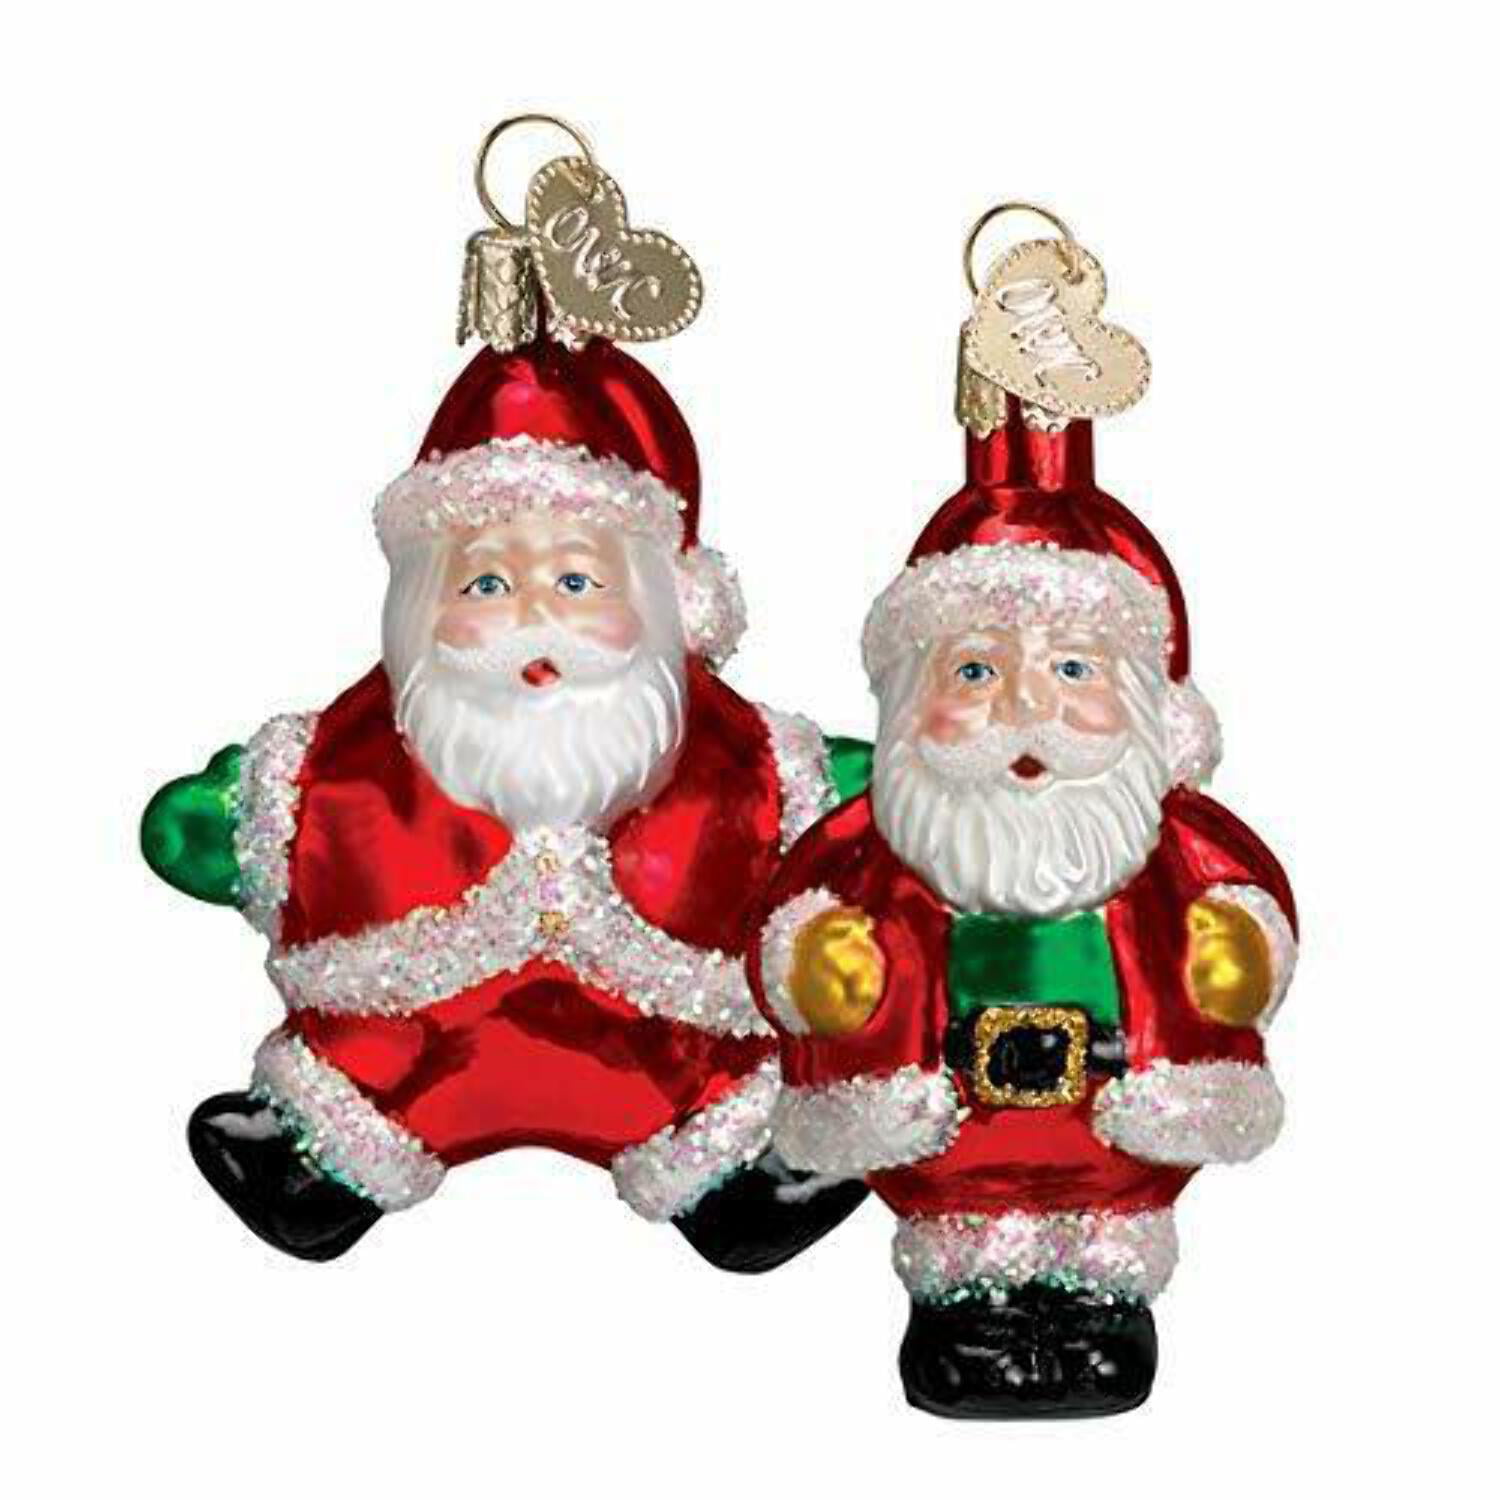 Old World Christmas Ornaments Tap Shoe Glass Blown Ornaments for Christmas Tree 